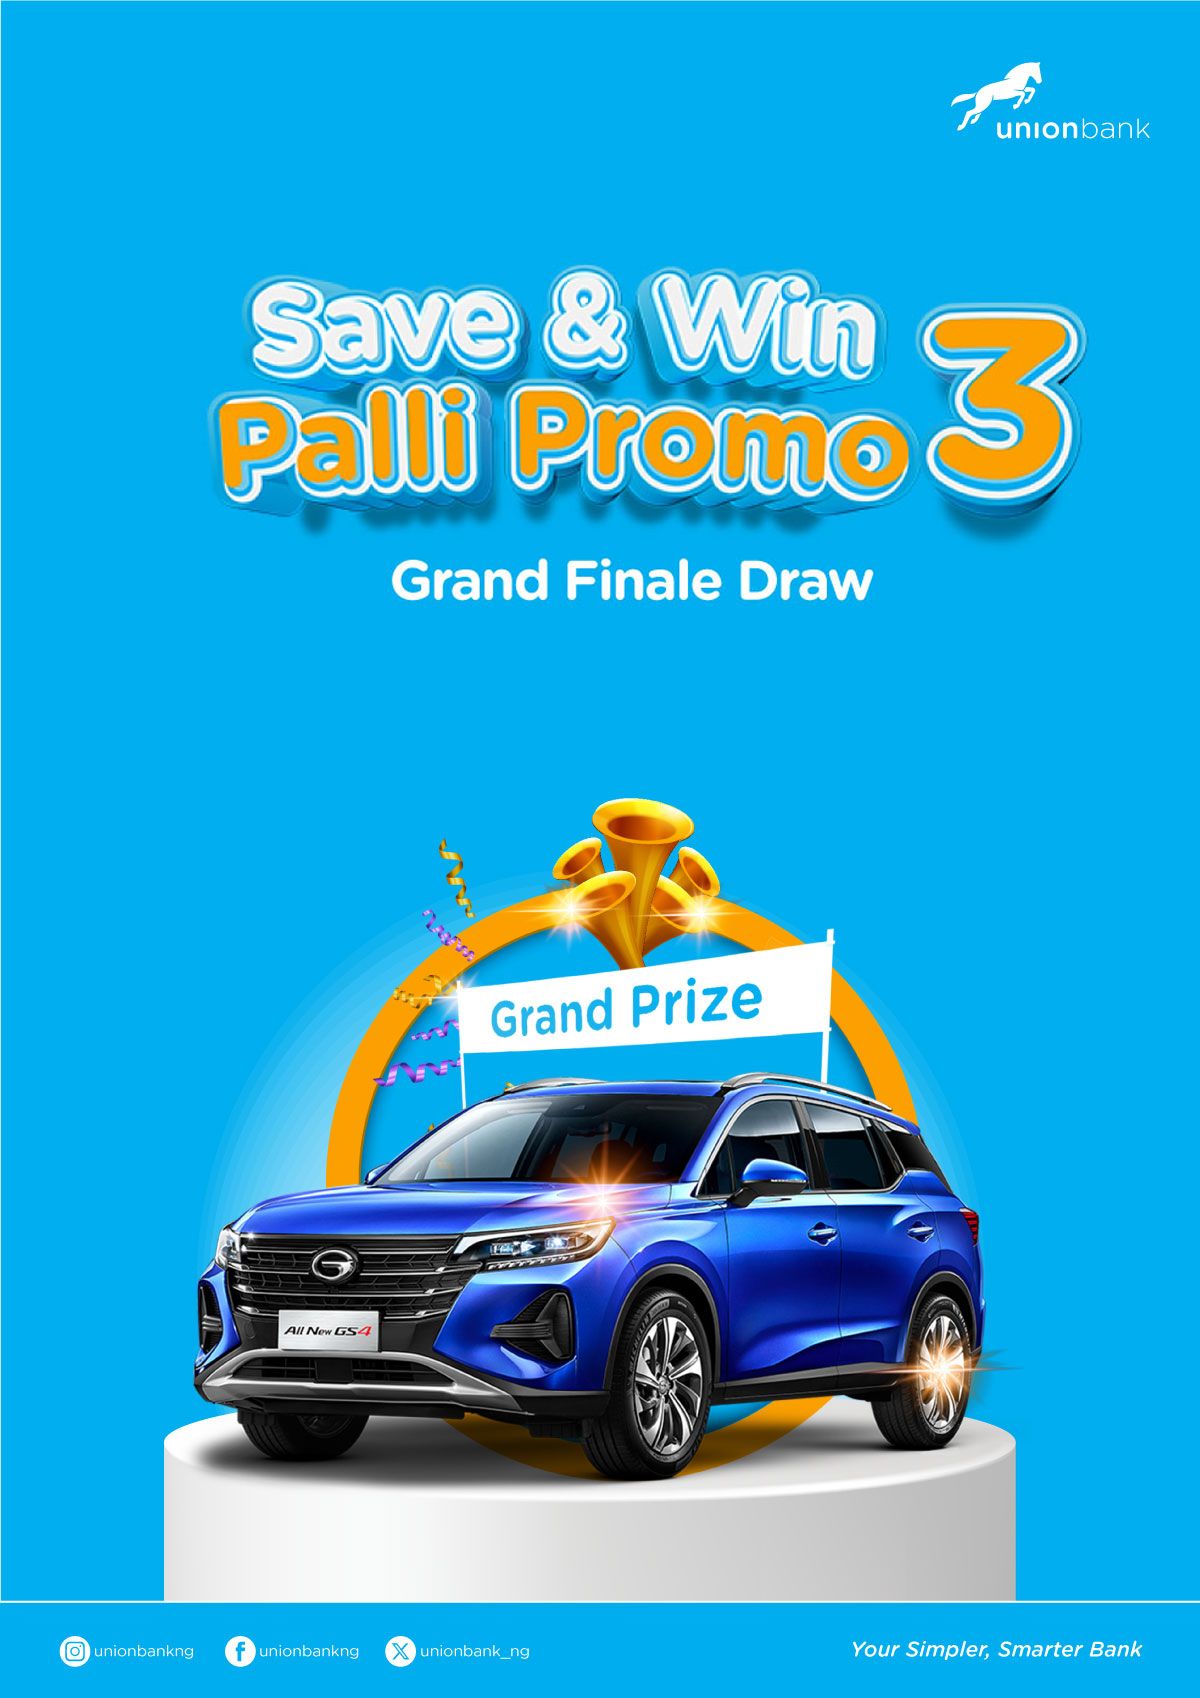 Don’t Miss Out on Union Bank’s Epic Save and Win Palli Promo 3.0 Finale